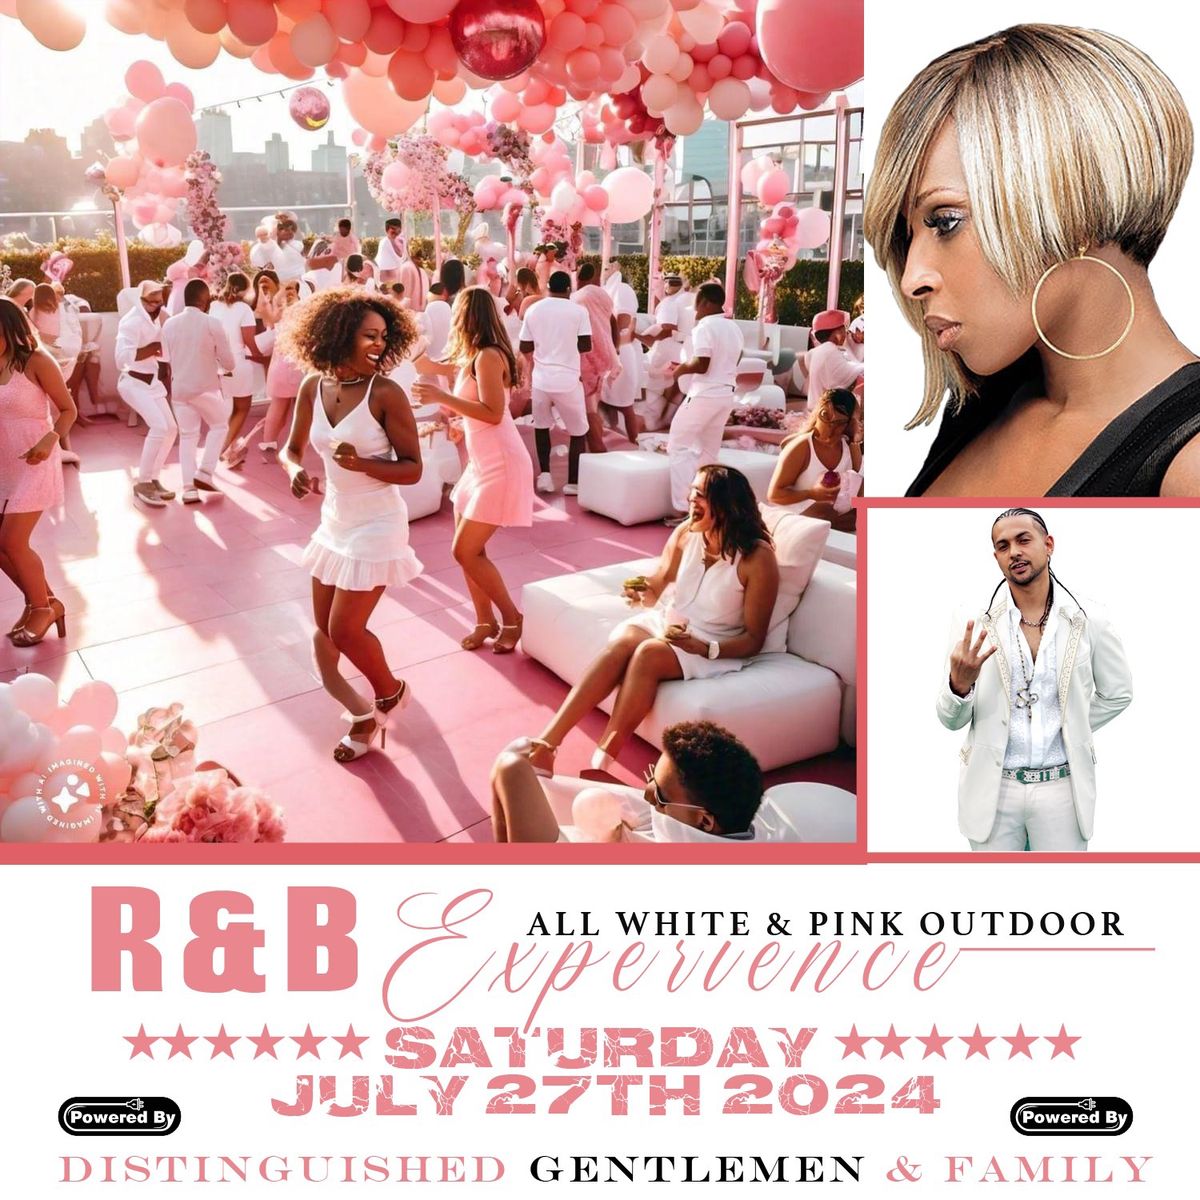 Distinguished Gentlemen All white & Pink Affair in the park